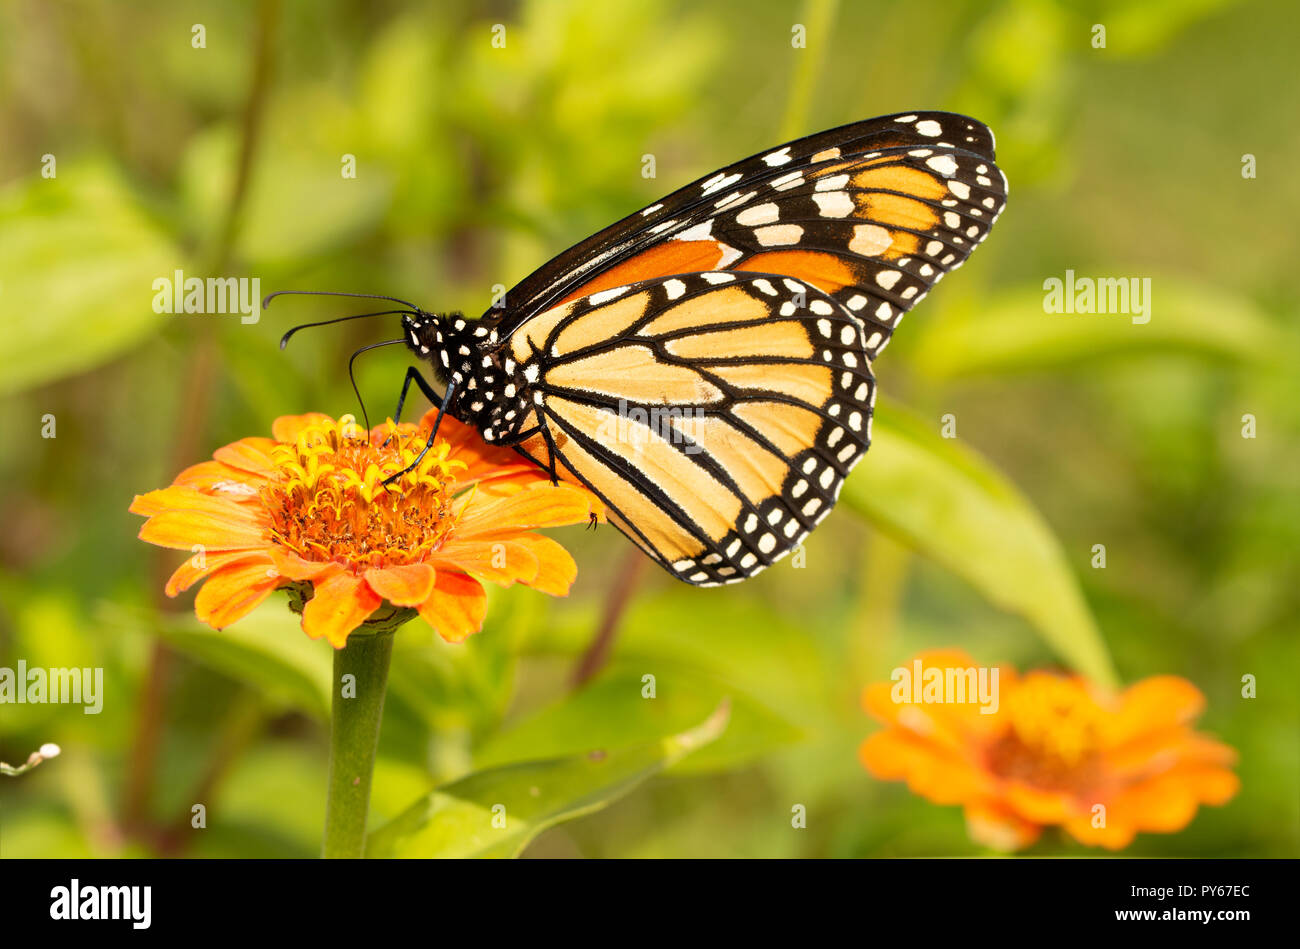 Migrating Monarch butterfly refueling on an orange Zinnia flower in fall Stock Photo